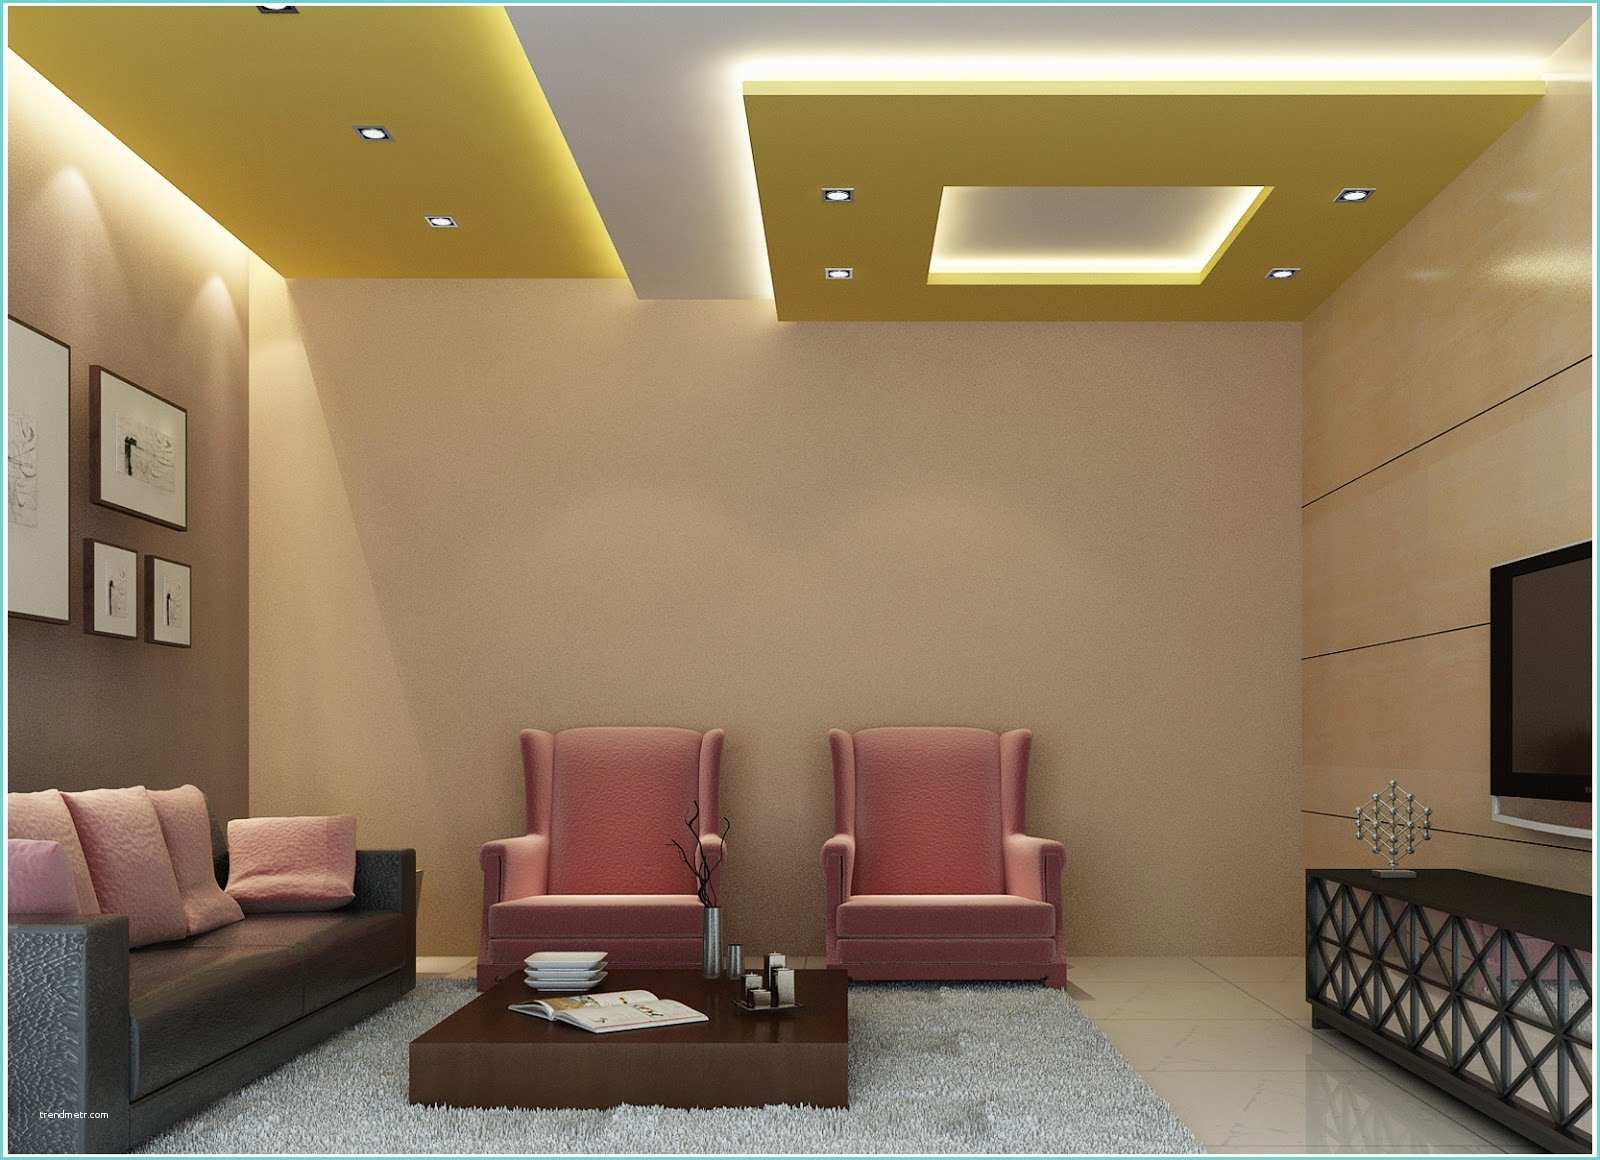 Pop Designs for Hall Pop Designs for Hall Ceiling Home Wall Decoration